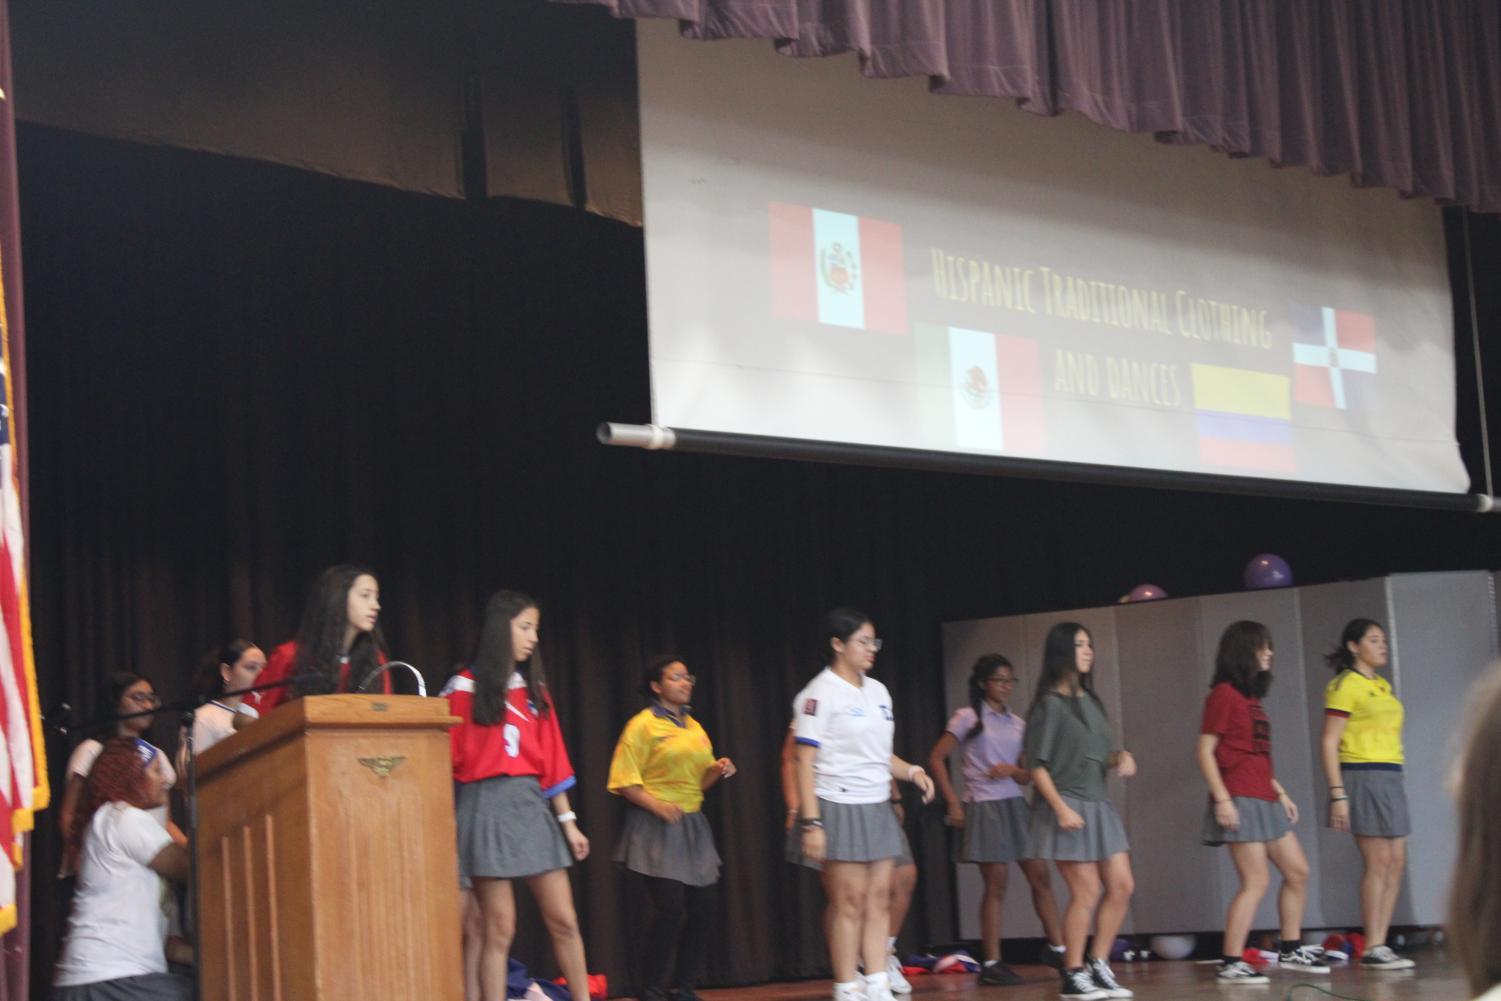 Students performing a dance to multiple songs during the assembly.